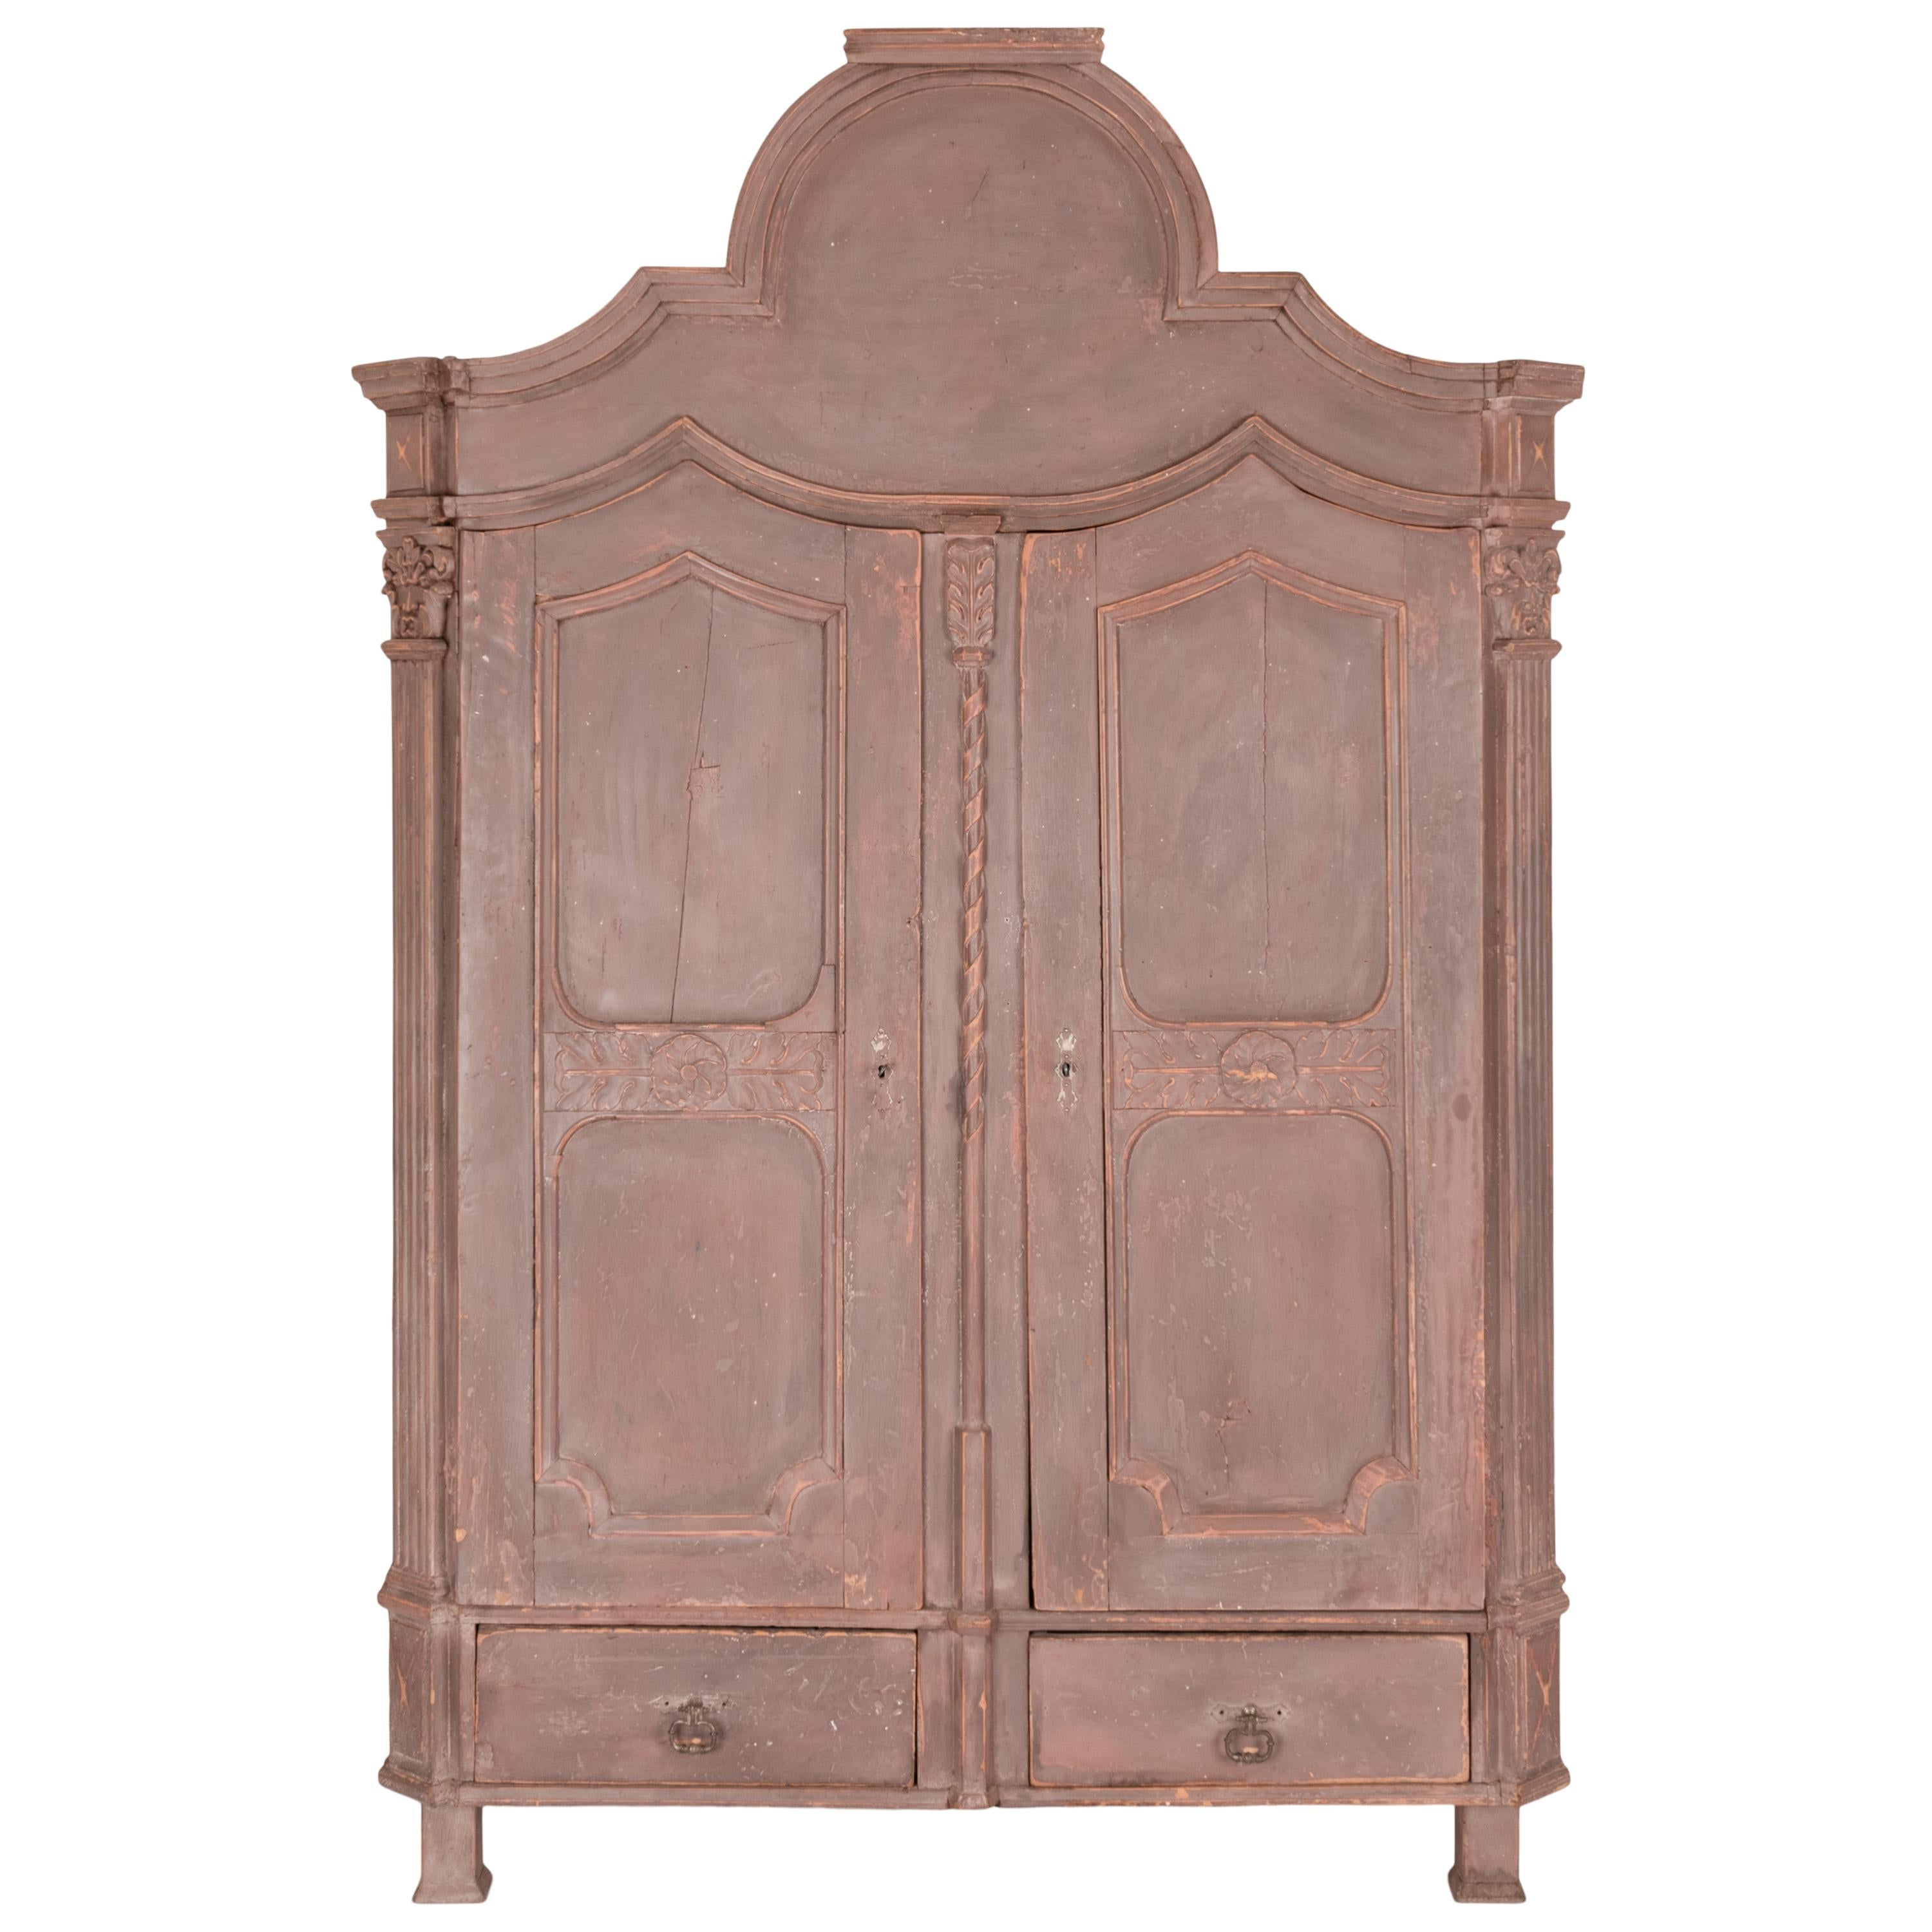 A rare antique Swedish Gustavian 18th century pine armoire, with the original painted decoration, circa 1780.
Very rare survivor with the original paint, the armoire having a domed top with twin doors below flanked with ribbed pilasters and topped